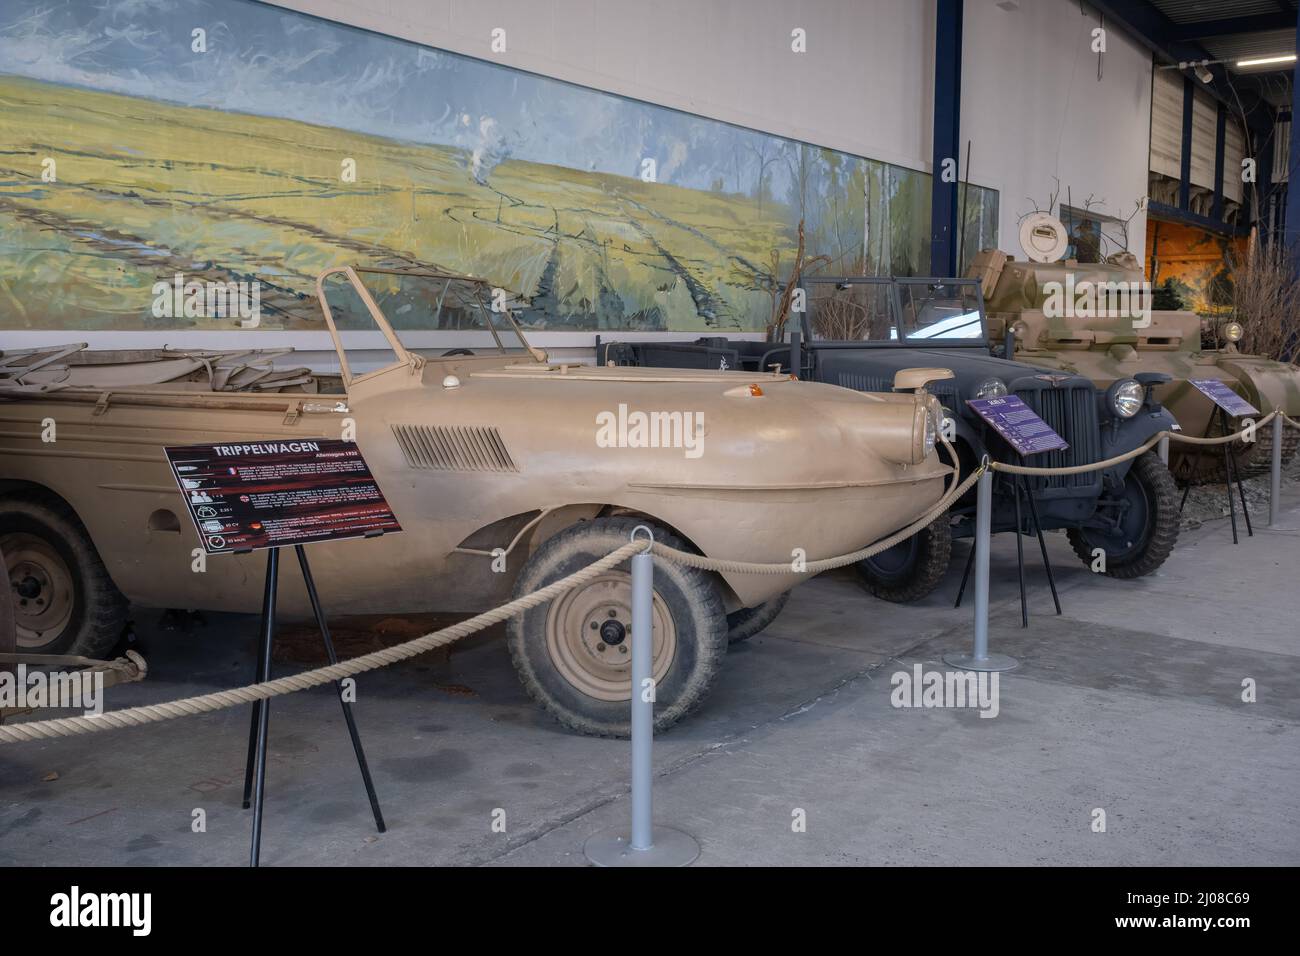 Saumur, France - February 26, 2022:  German Trippelwagen (amphibious vehicle). Tank museum in Saumur (Musee des Blindes). Second world war exhibition. Stock Photo